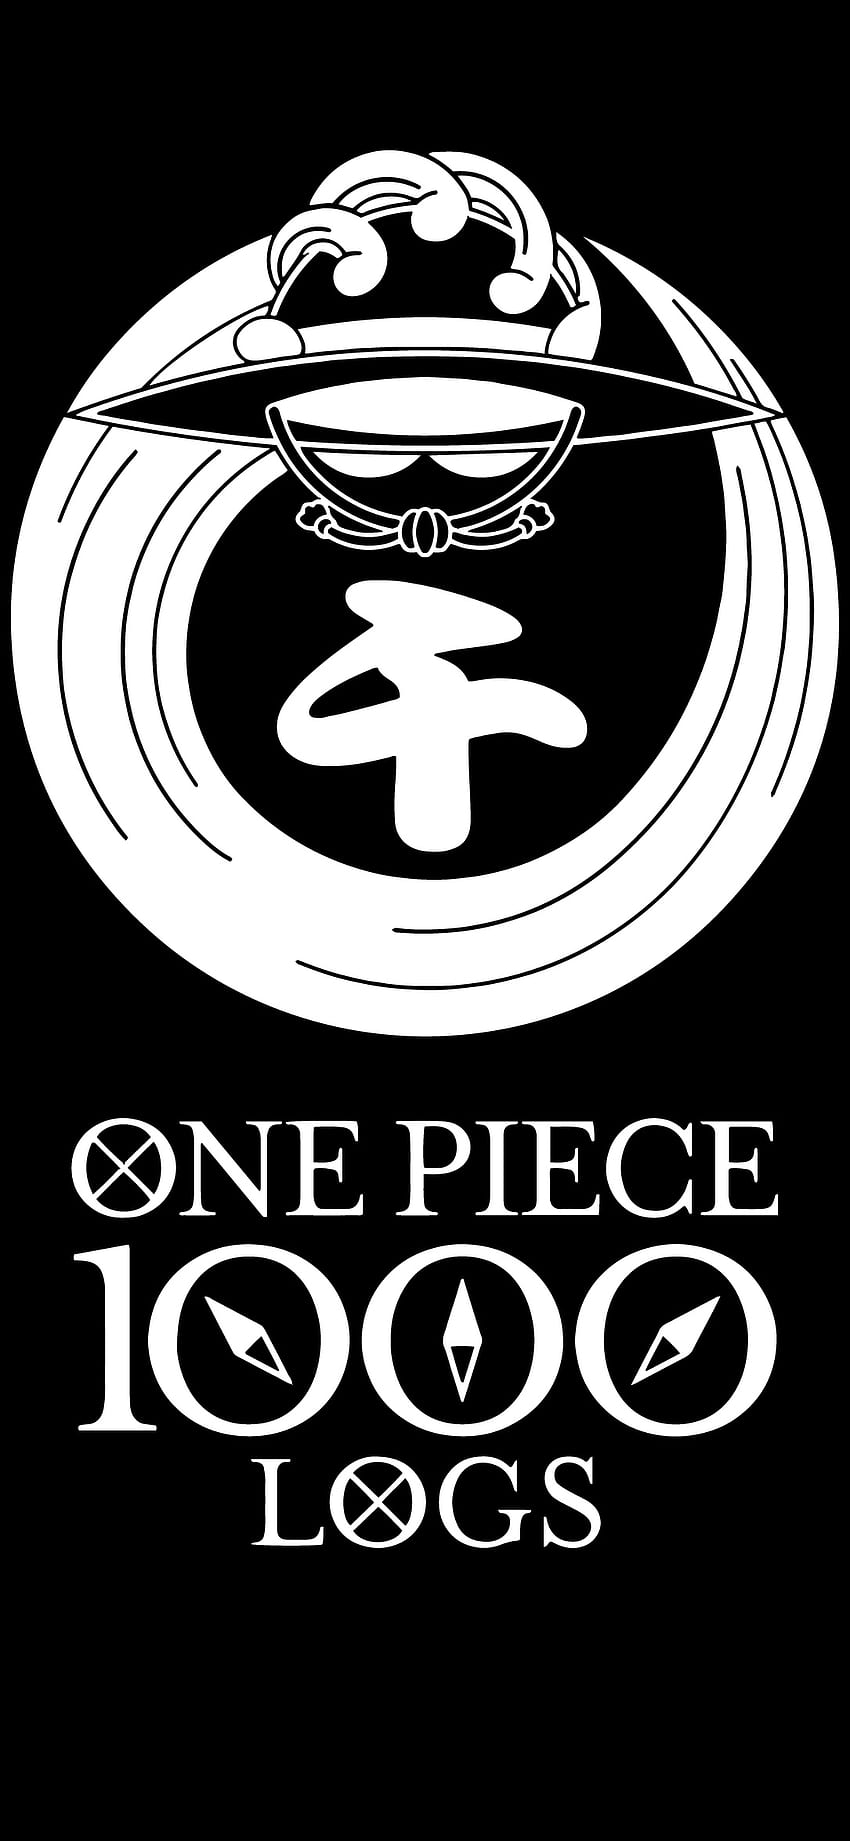 One Piece 1000, Luffy, Symbol, Hats, Icon, Logs, Flag HD phone wallpaper